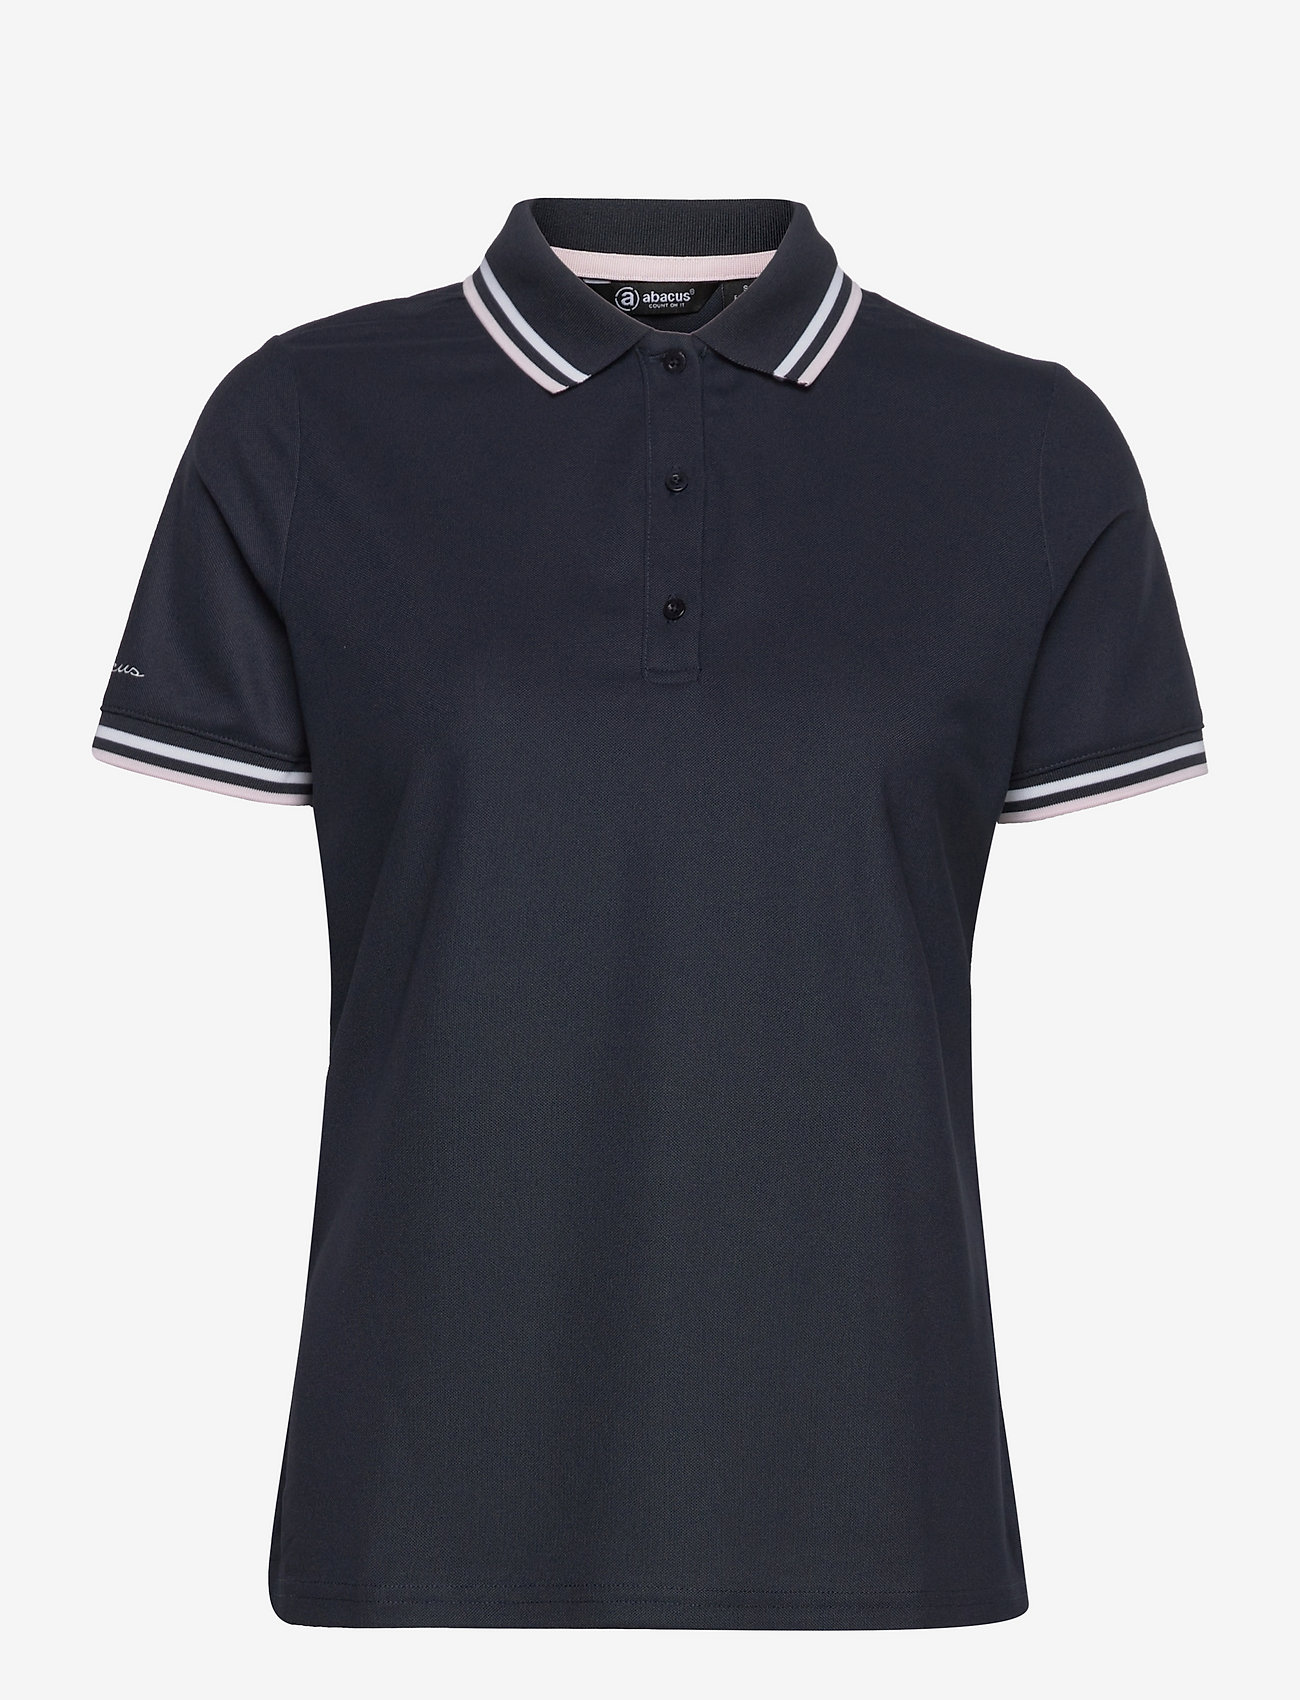 Abacus - Lds Pines polo - pikeepaidat - navy - 0